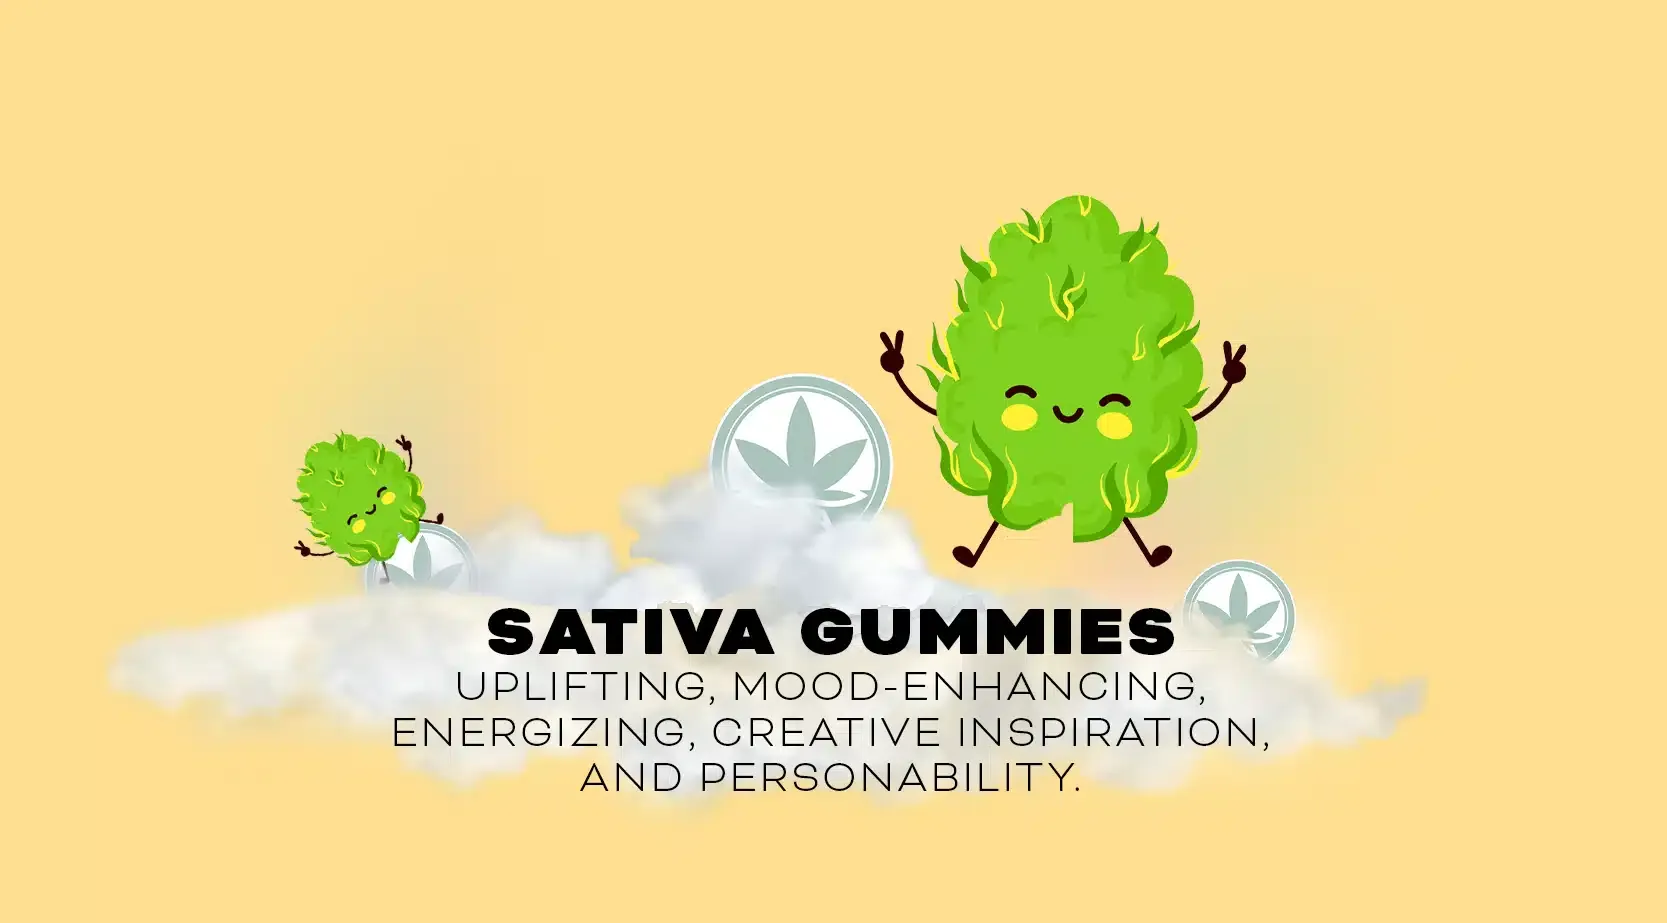 Sativa gummies in the clouds with benefits listed as 'uplifting, mood-enhancing, energizing, creative inspiration, and personability'.